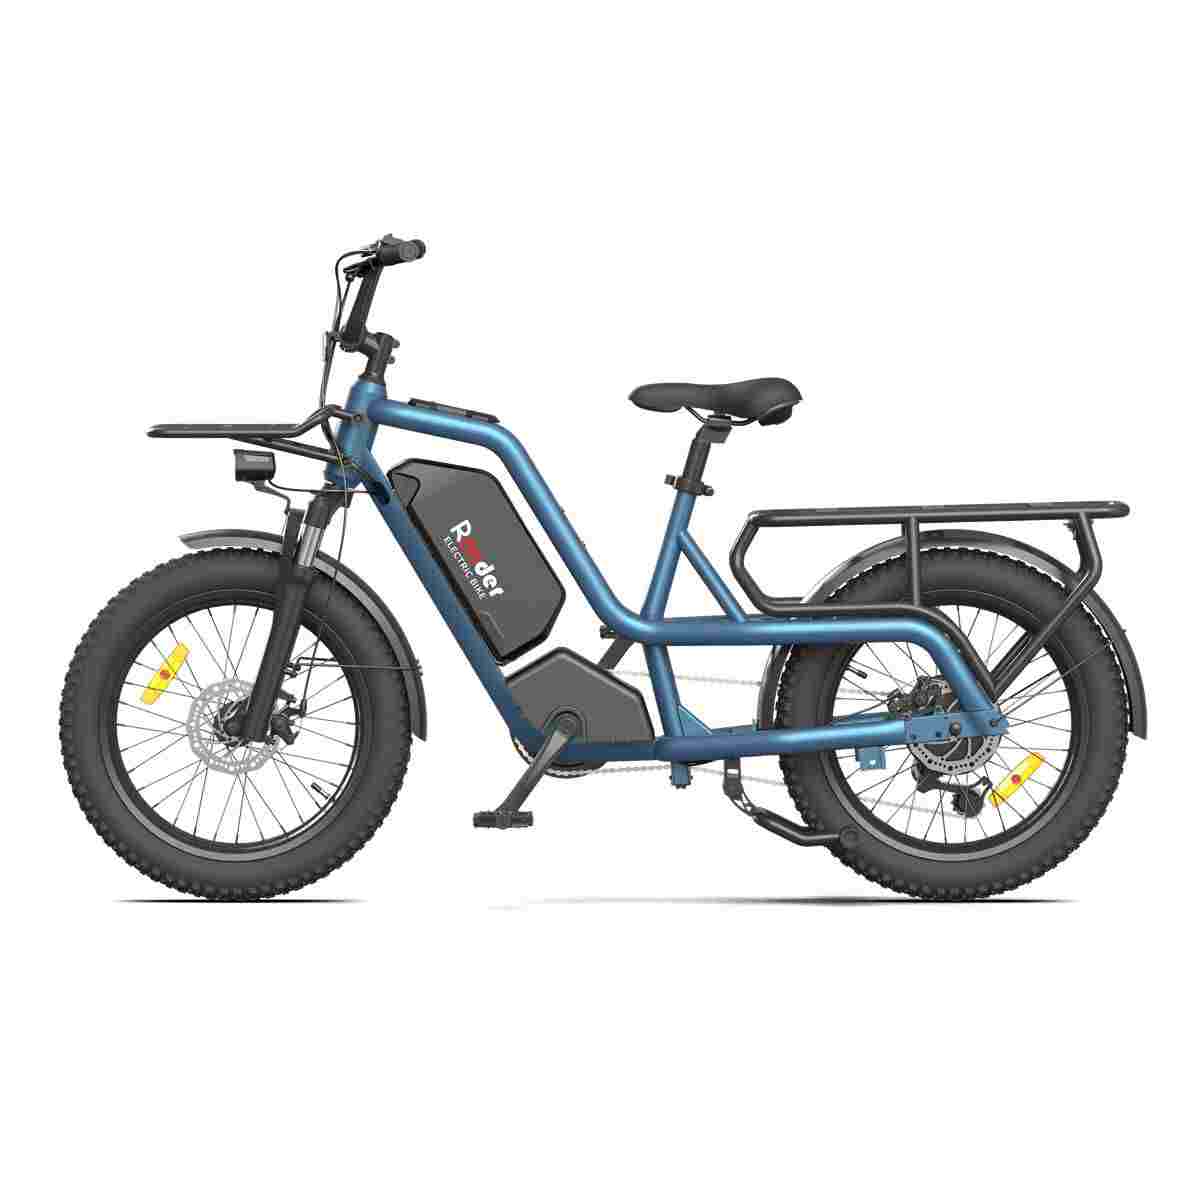 2 wheel electric scooter wholesale price